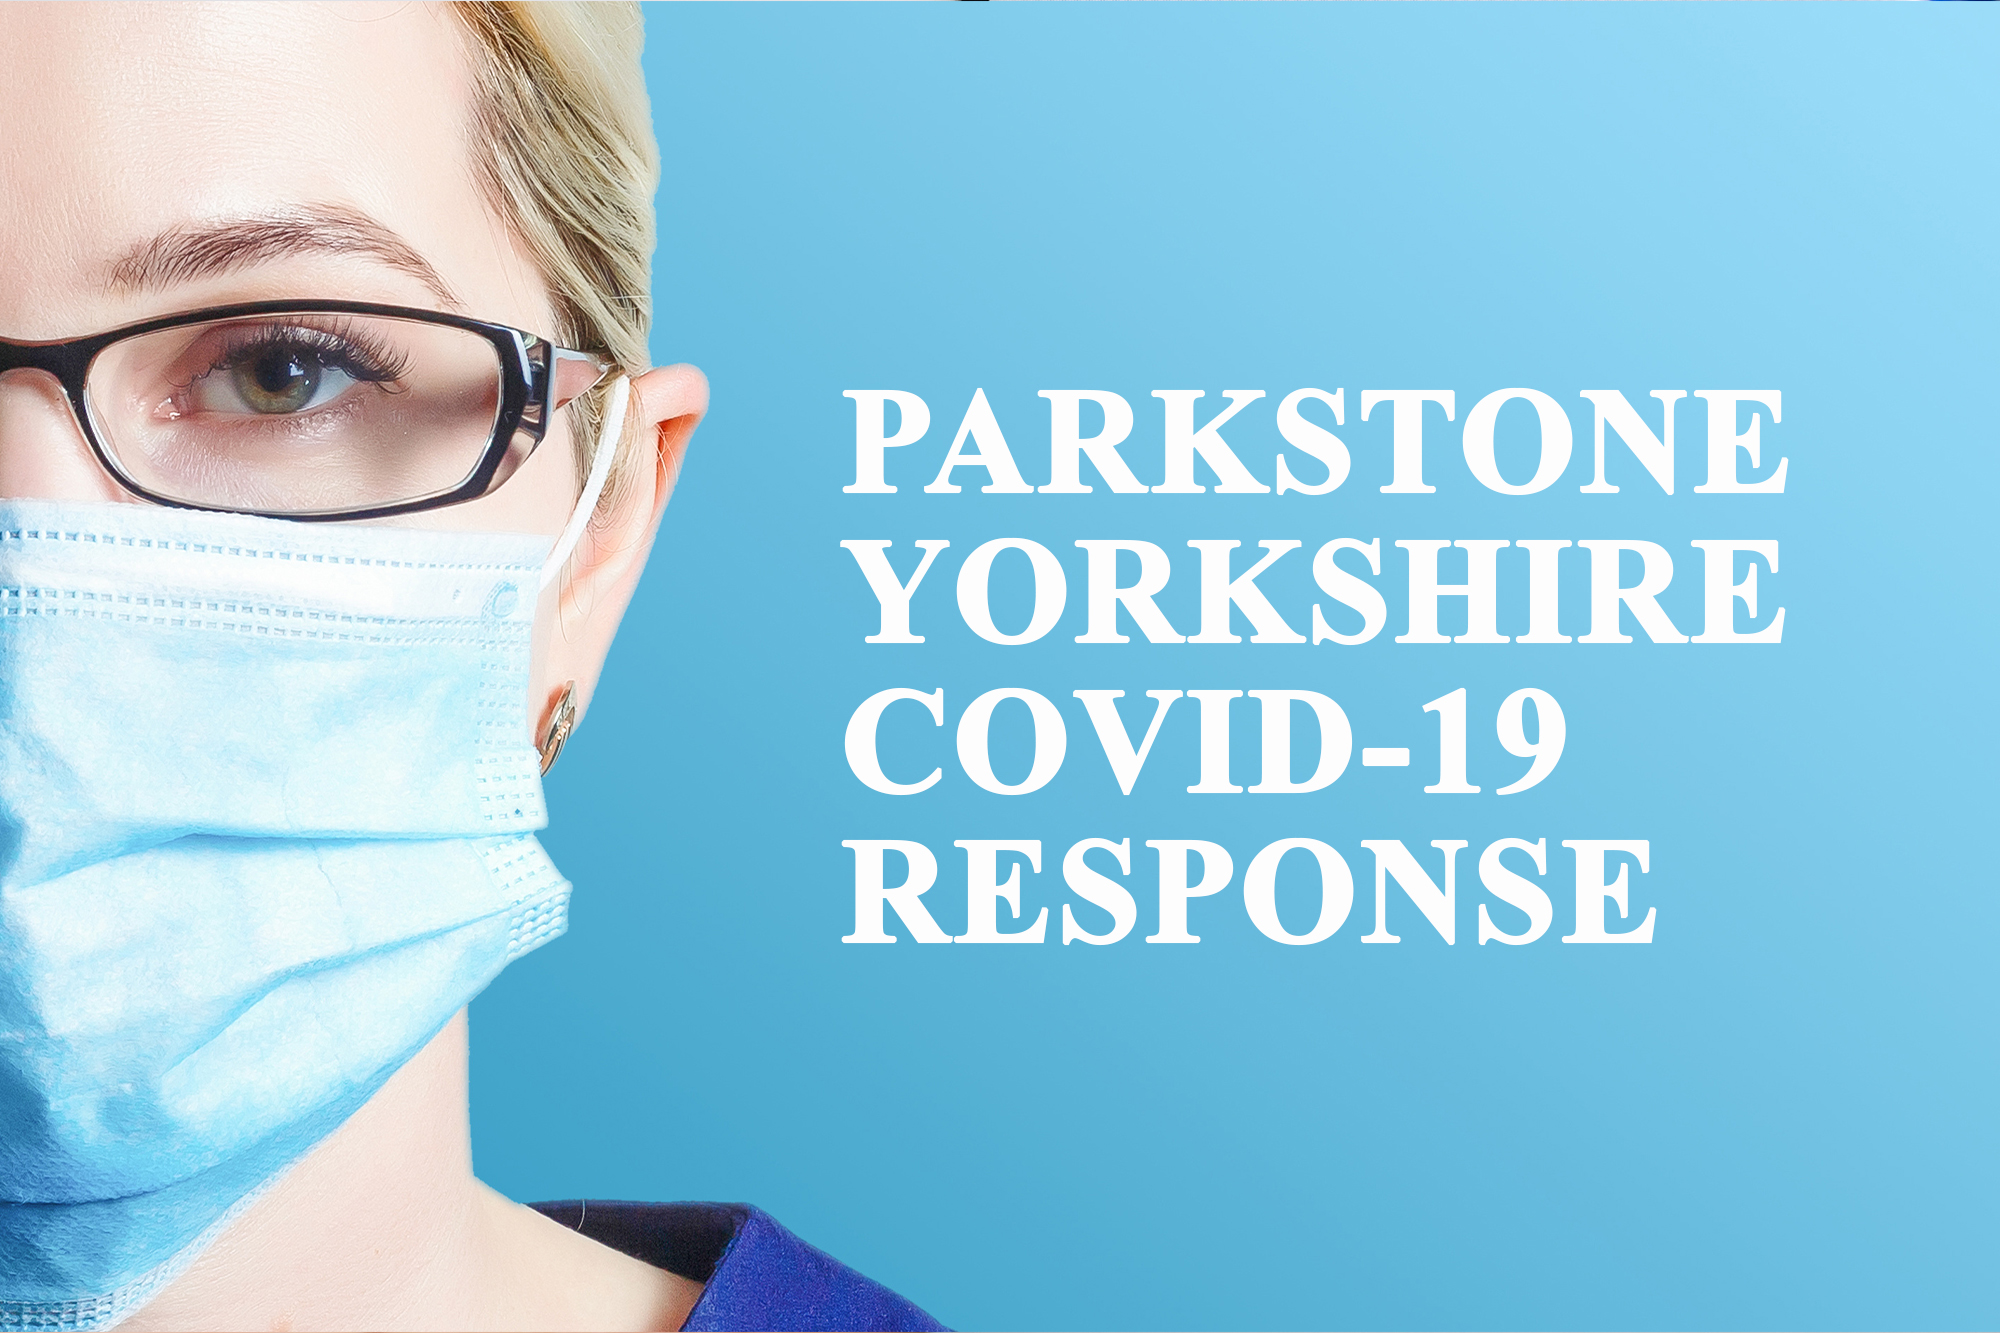 Parkstone Yorkshire terms and conditions for essential repair work during the Coronavirus pandemic.